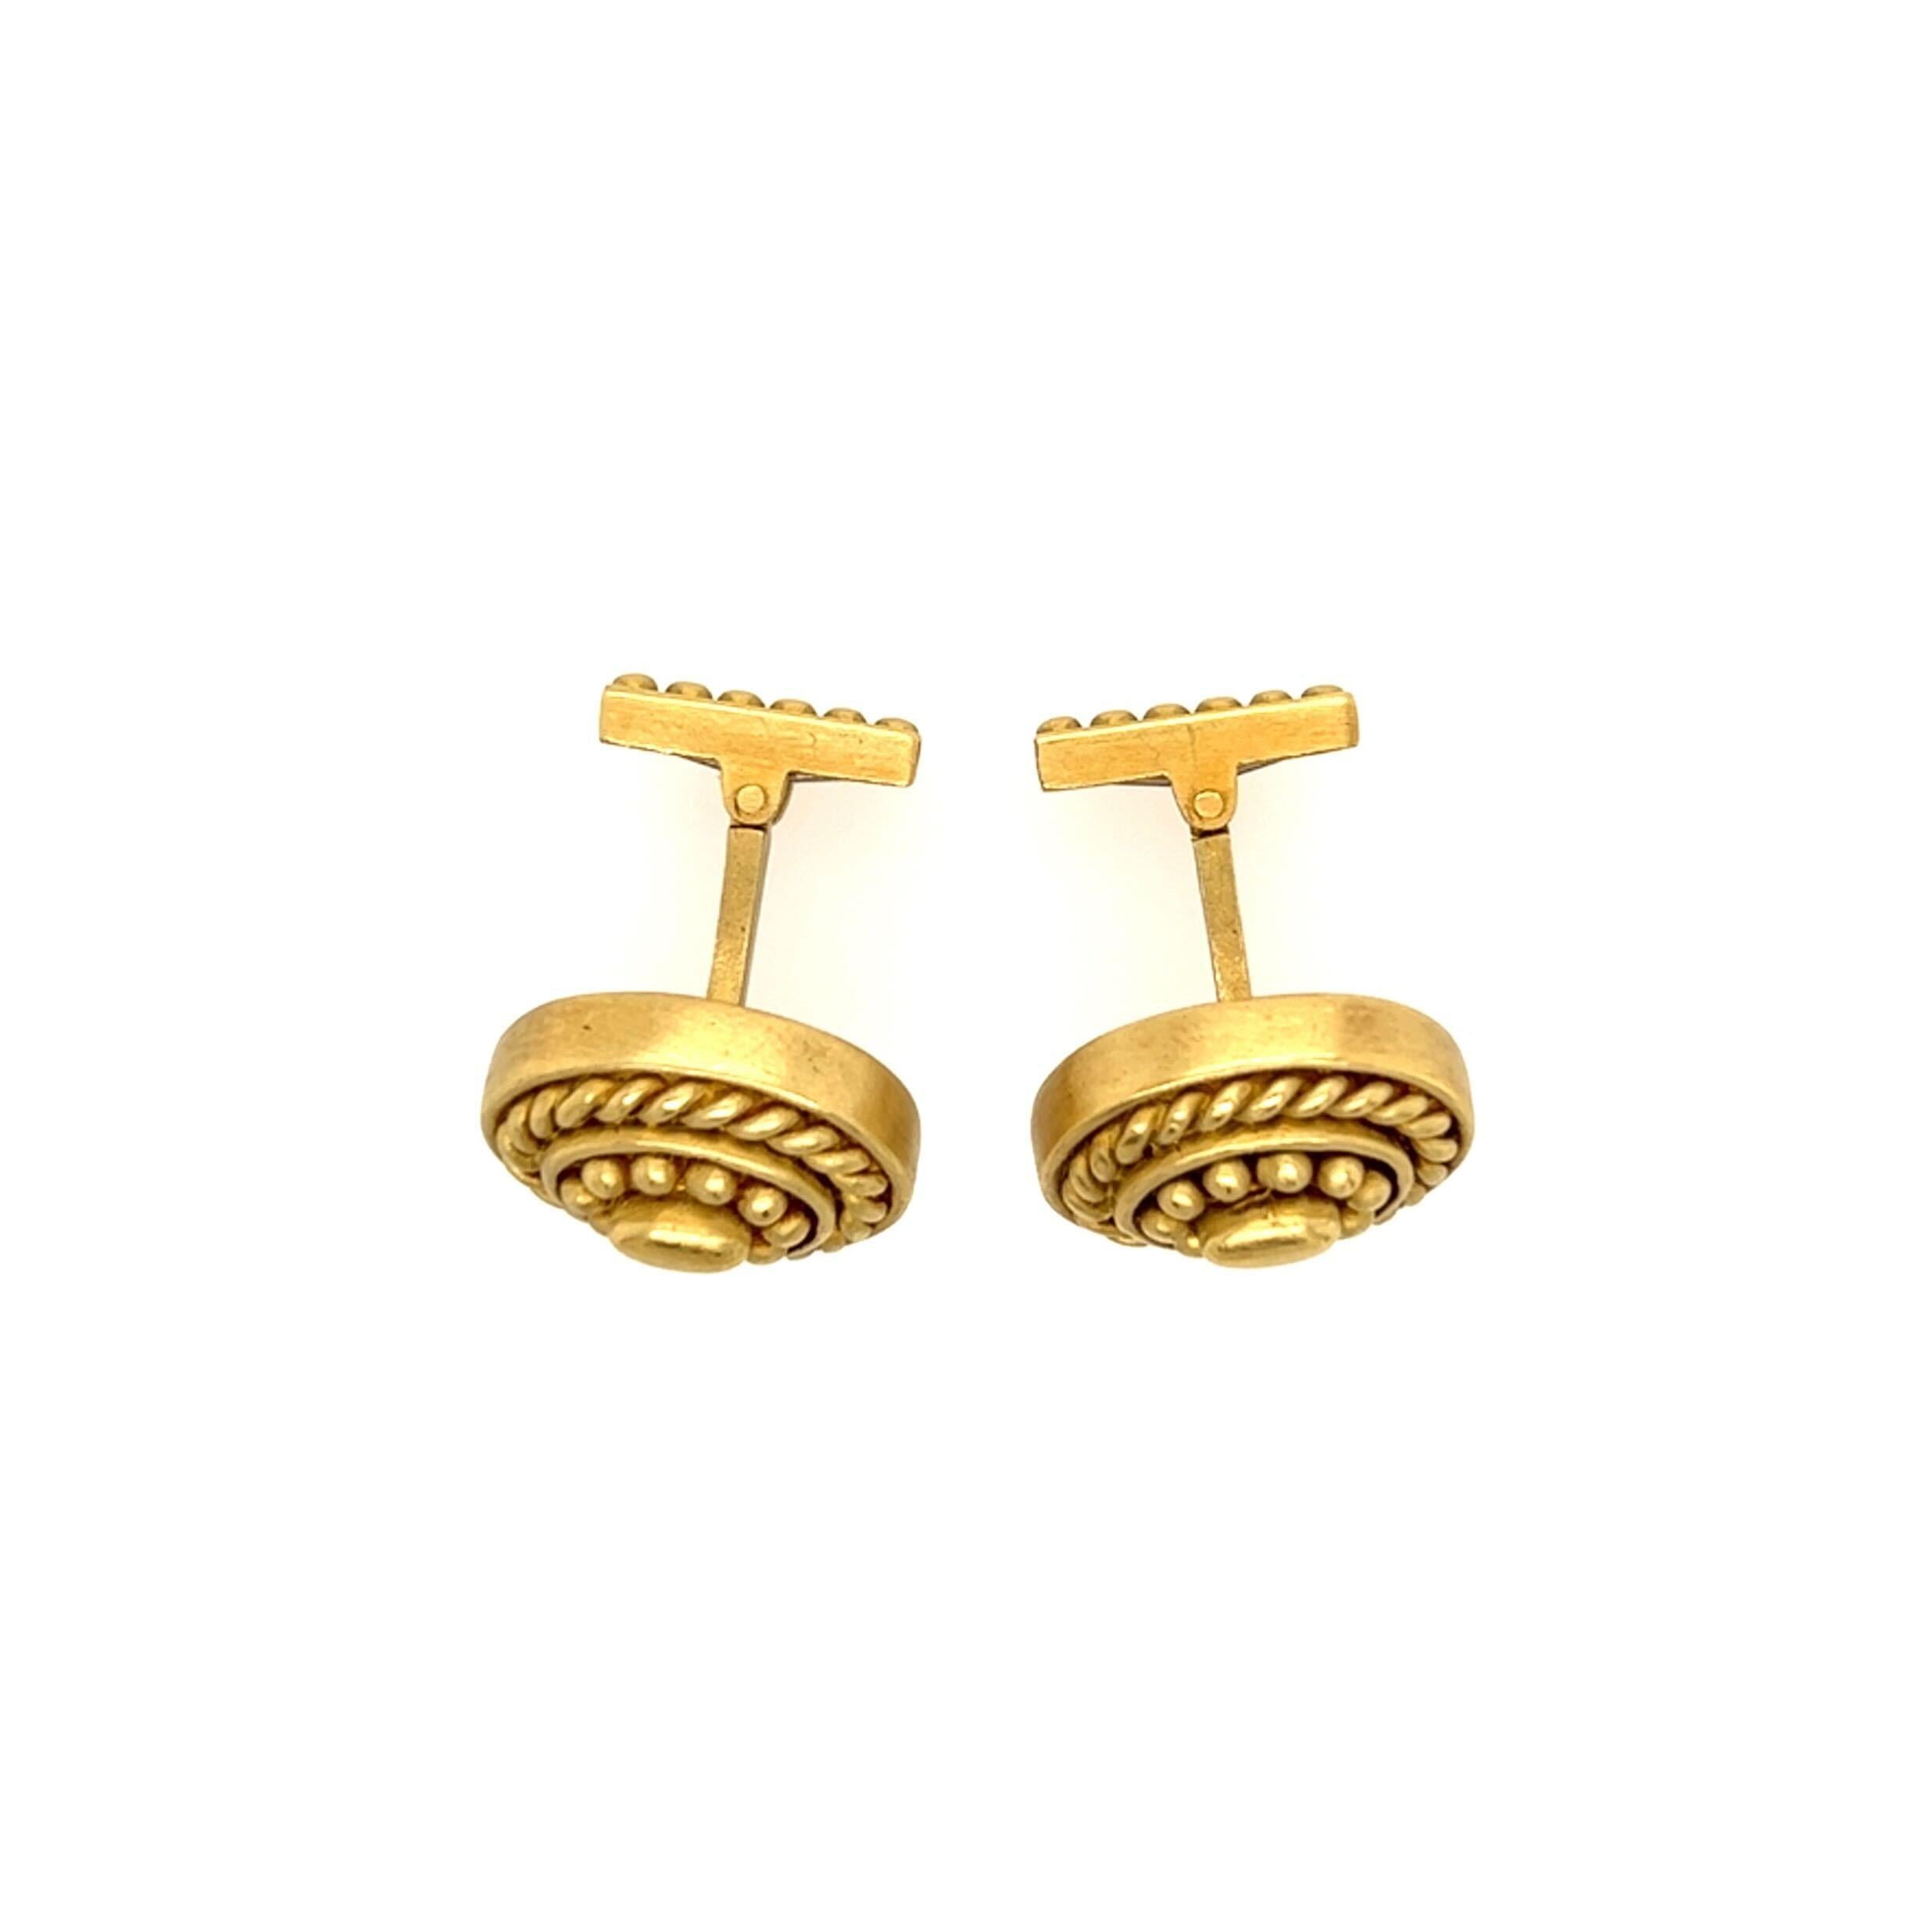 A pair of 18 karat yellow gold cufflinks. Judith Ripka. Designed as a matte ropework and beaded oval plaque, joined by a bar to a swivel link. Length is approximately 5/8 inches, gross weight is approximately 28.3 grams.